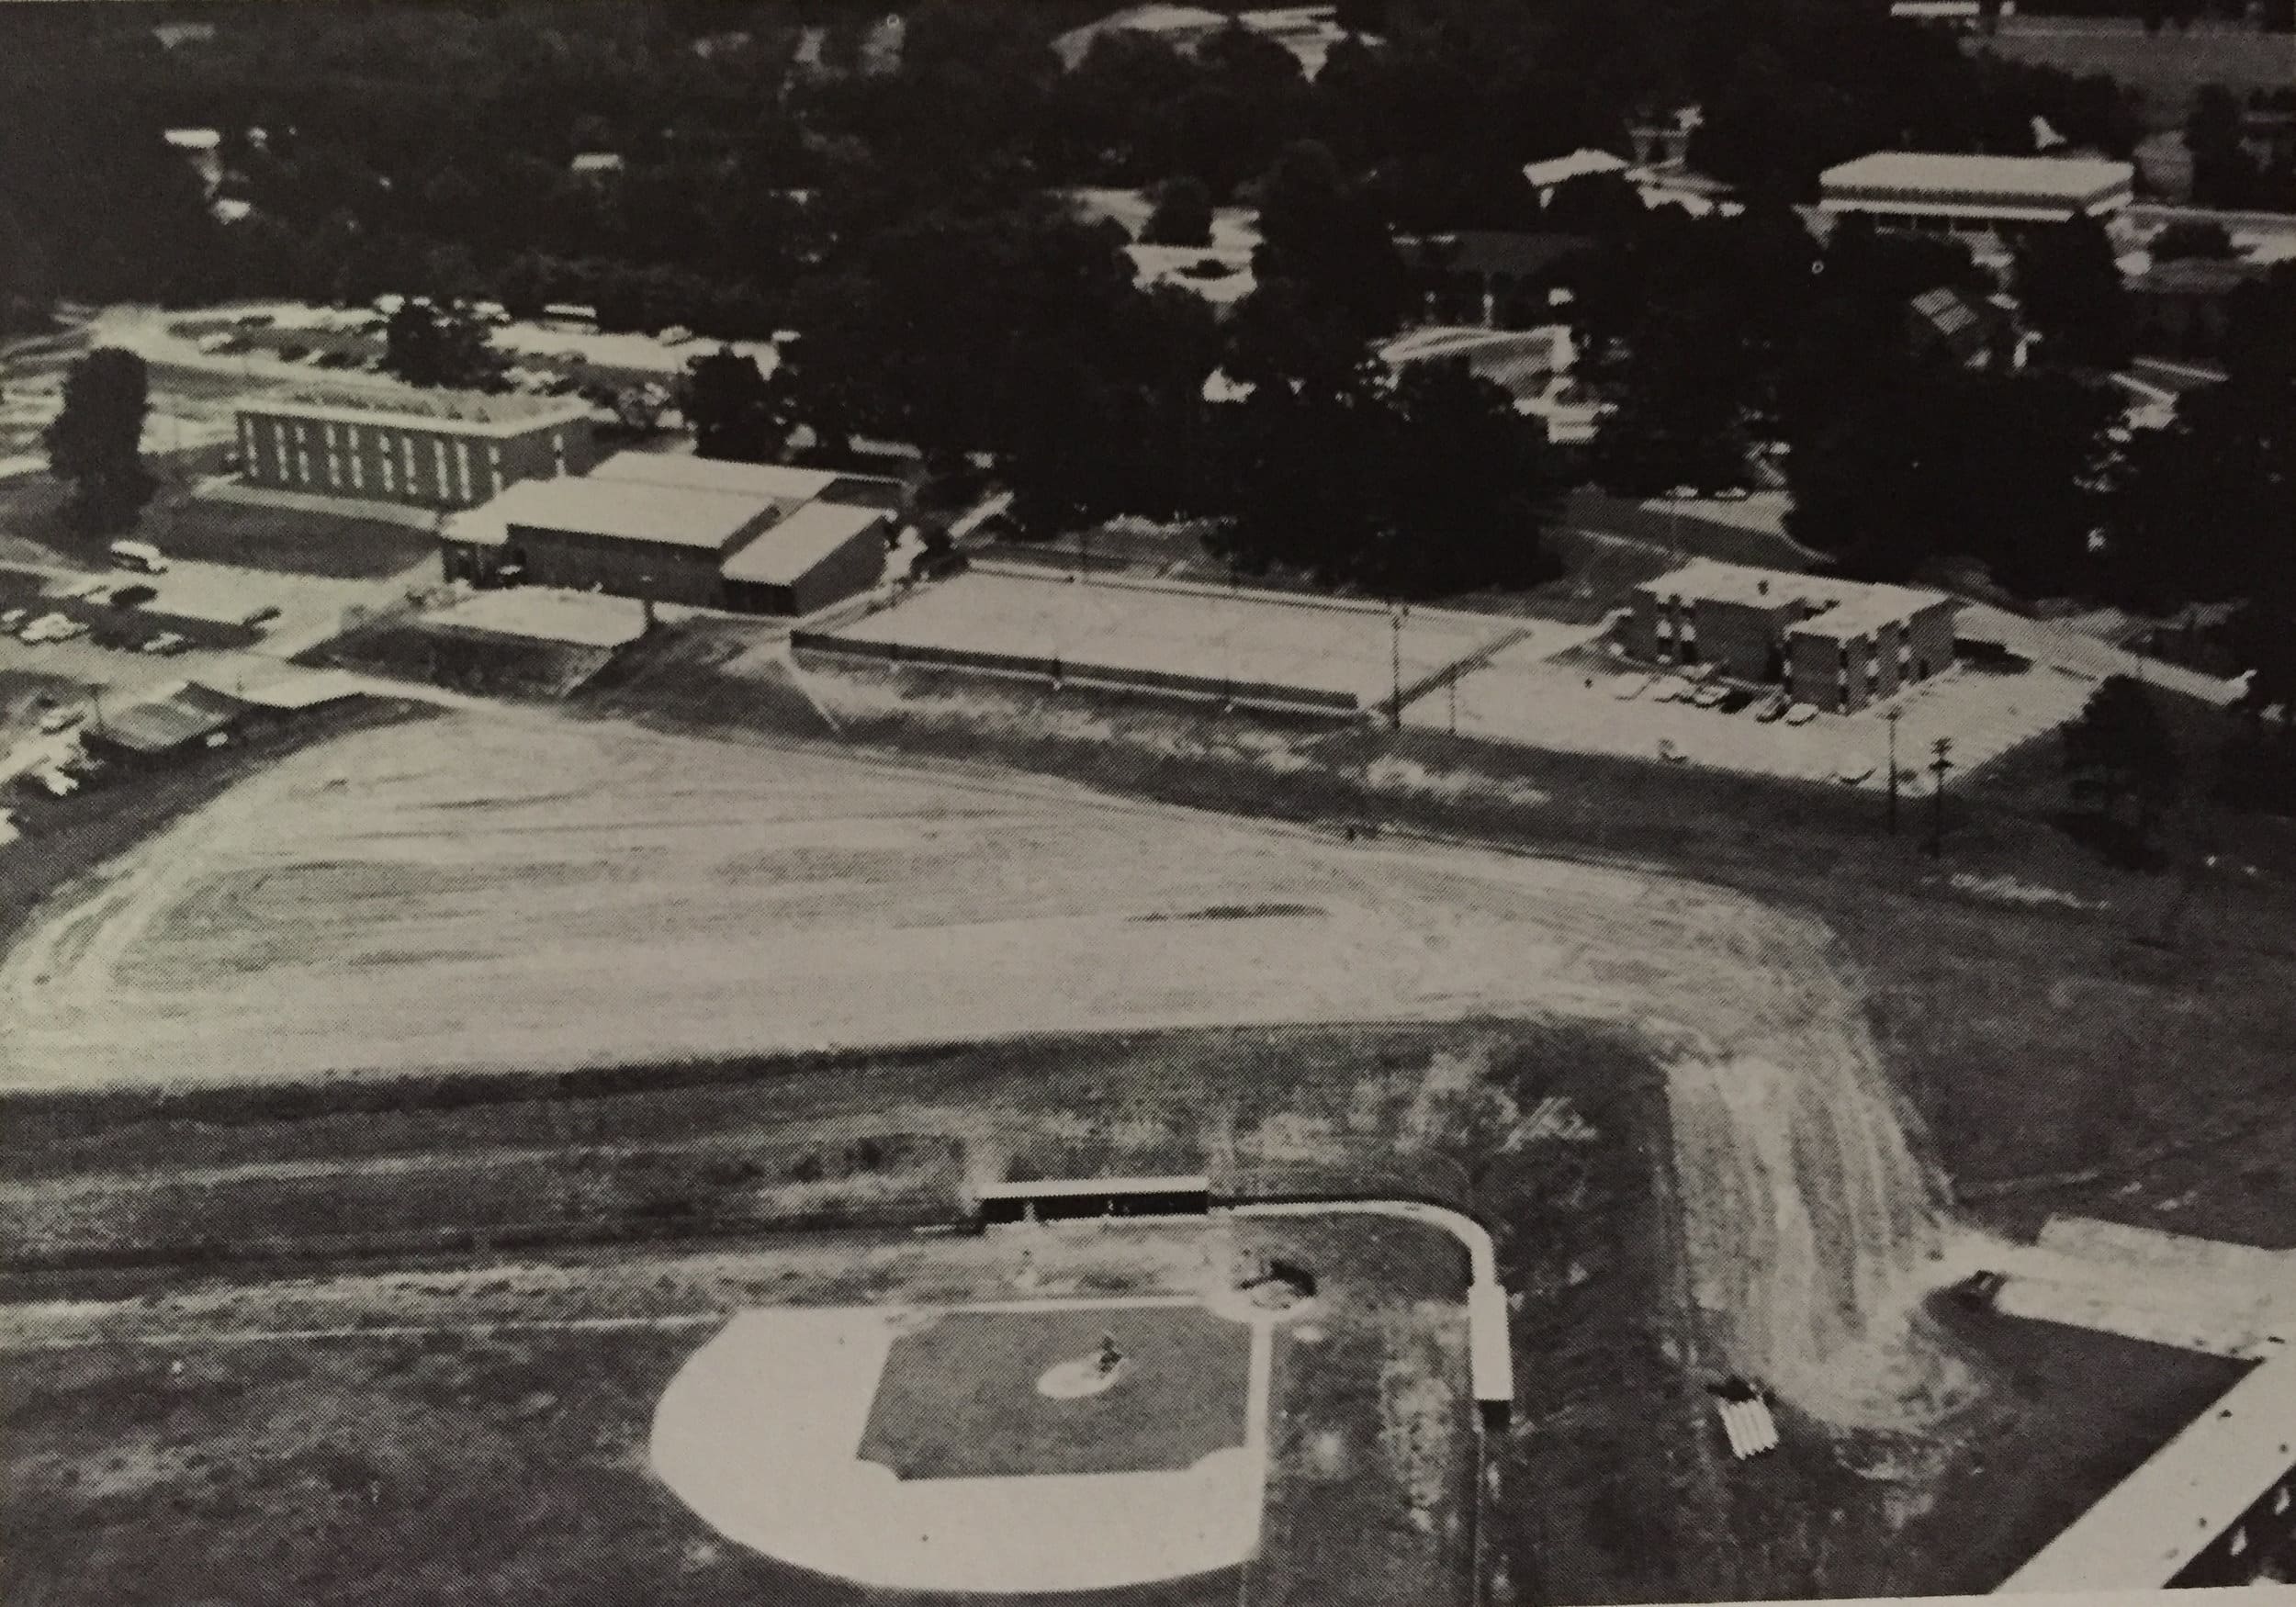 Photo courtesy of Robert Gawrys. Ashemore field when it was originally constructed in 1984.